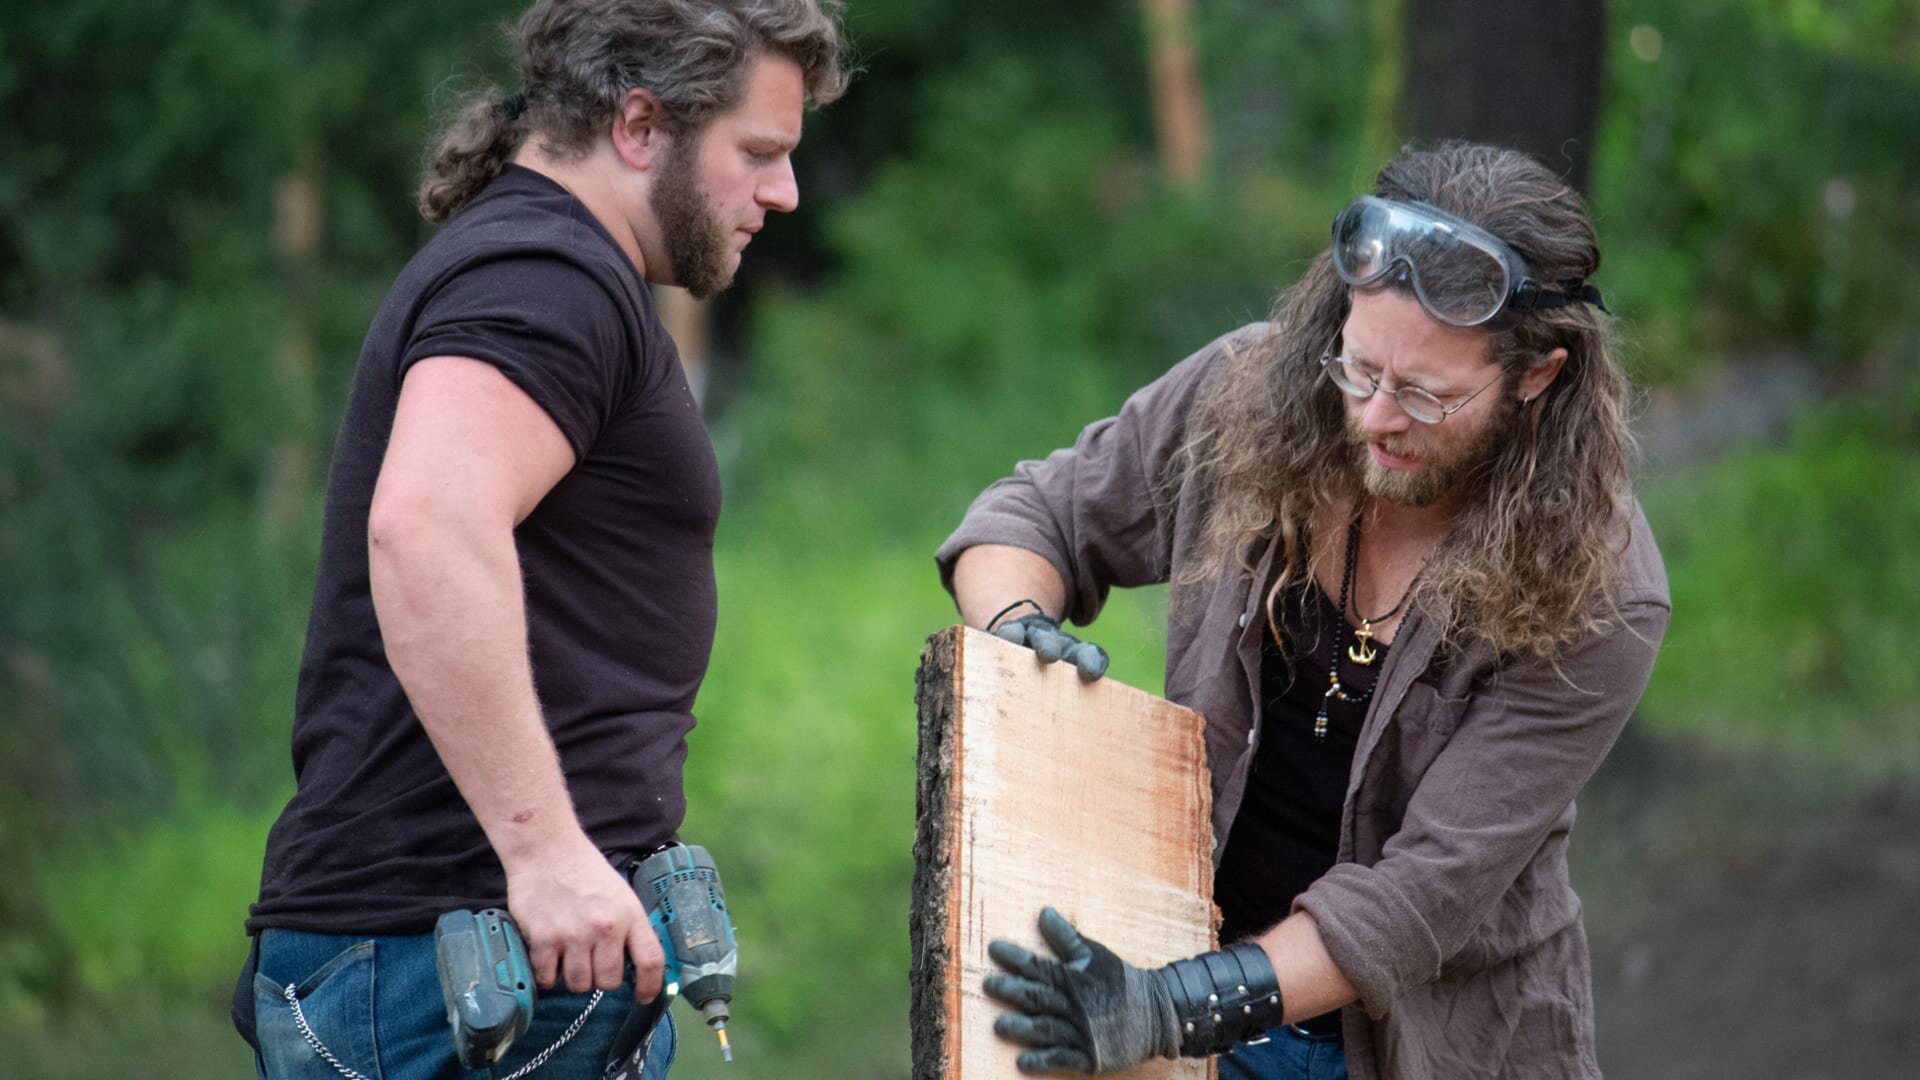 Alaskan Bush People S12E6 A Bottle for Your Thoughts